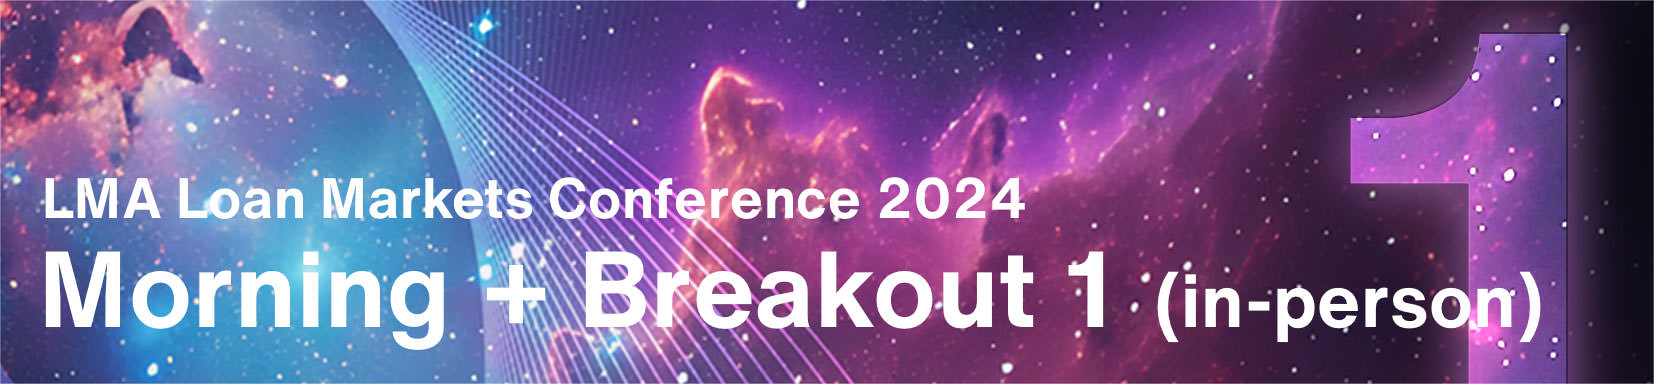 Morning + Breakout 1 (in-person) - LMA Loan Markets Conference, 17 September 2024